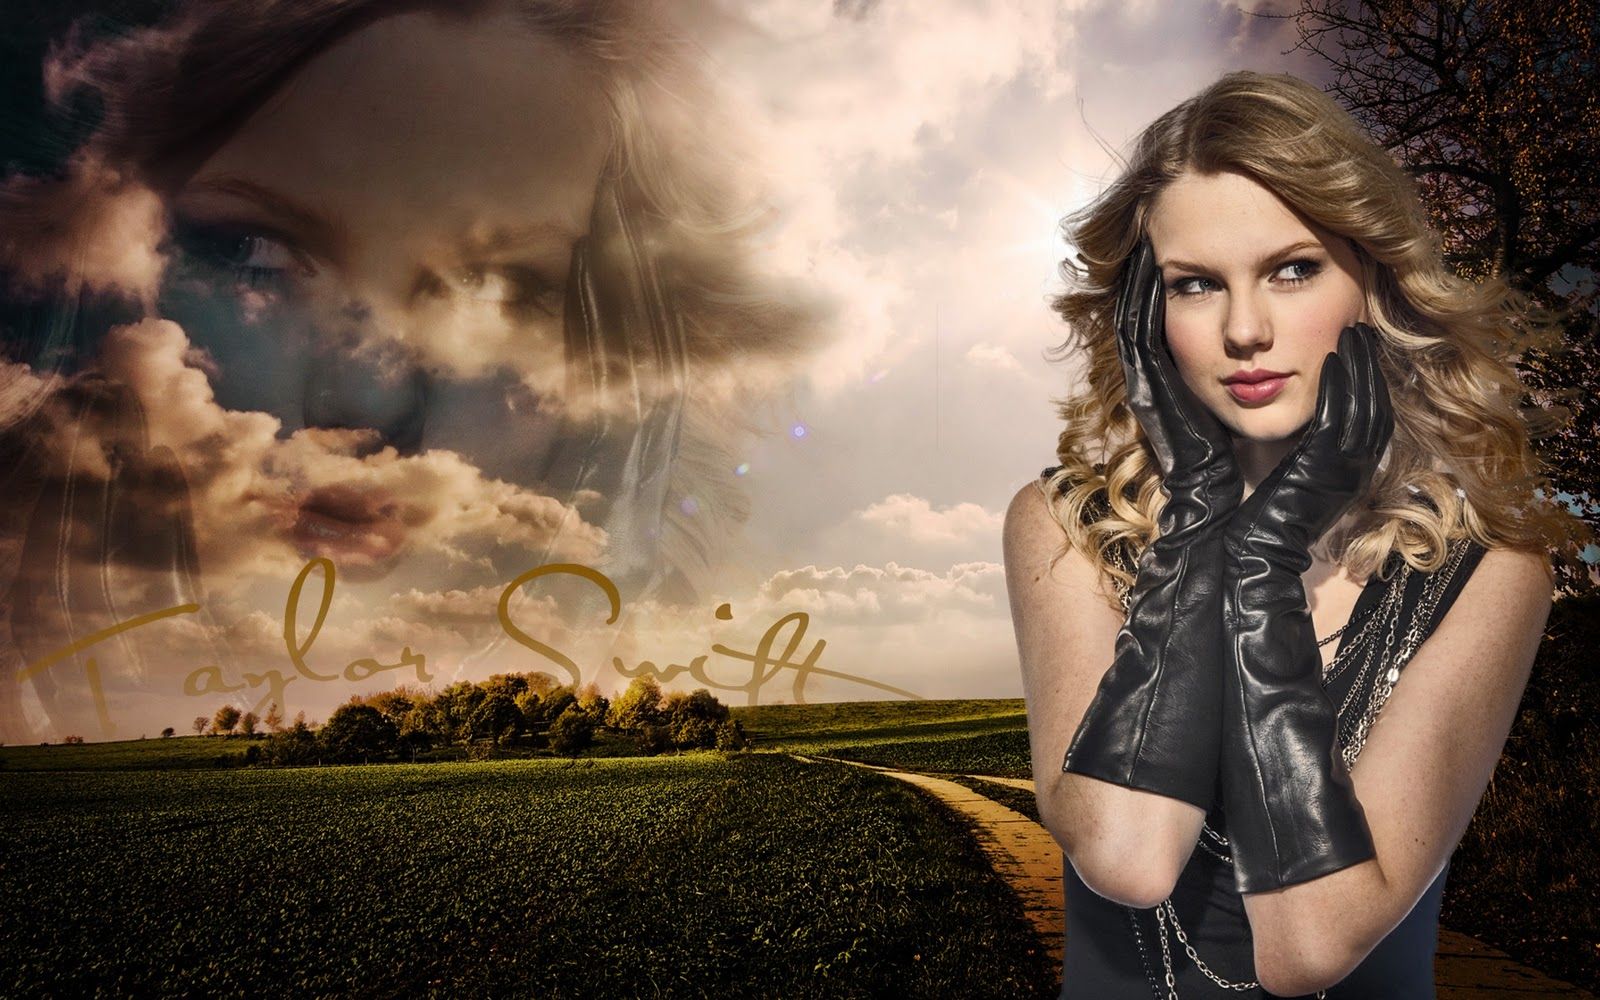 Taylor Swift Computer Background. Taylor Swift Wallpaper Celebrity, Taylor Swift Gorgeous Wallpaper and Taylor Unicorn Wallpaper